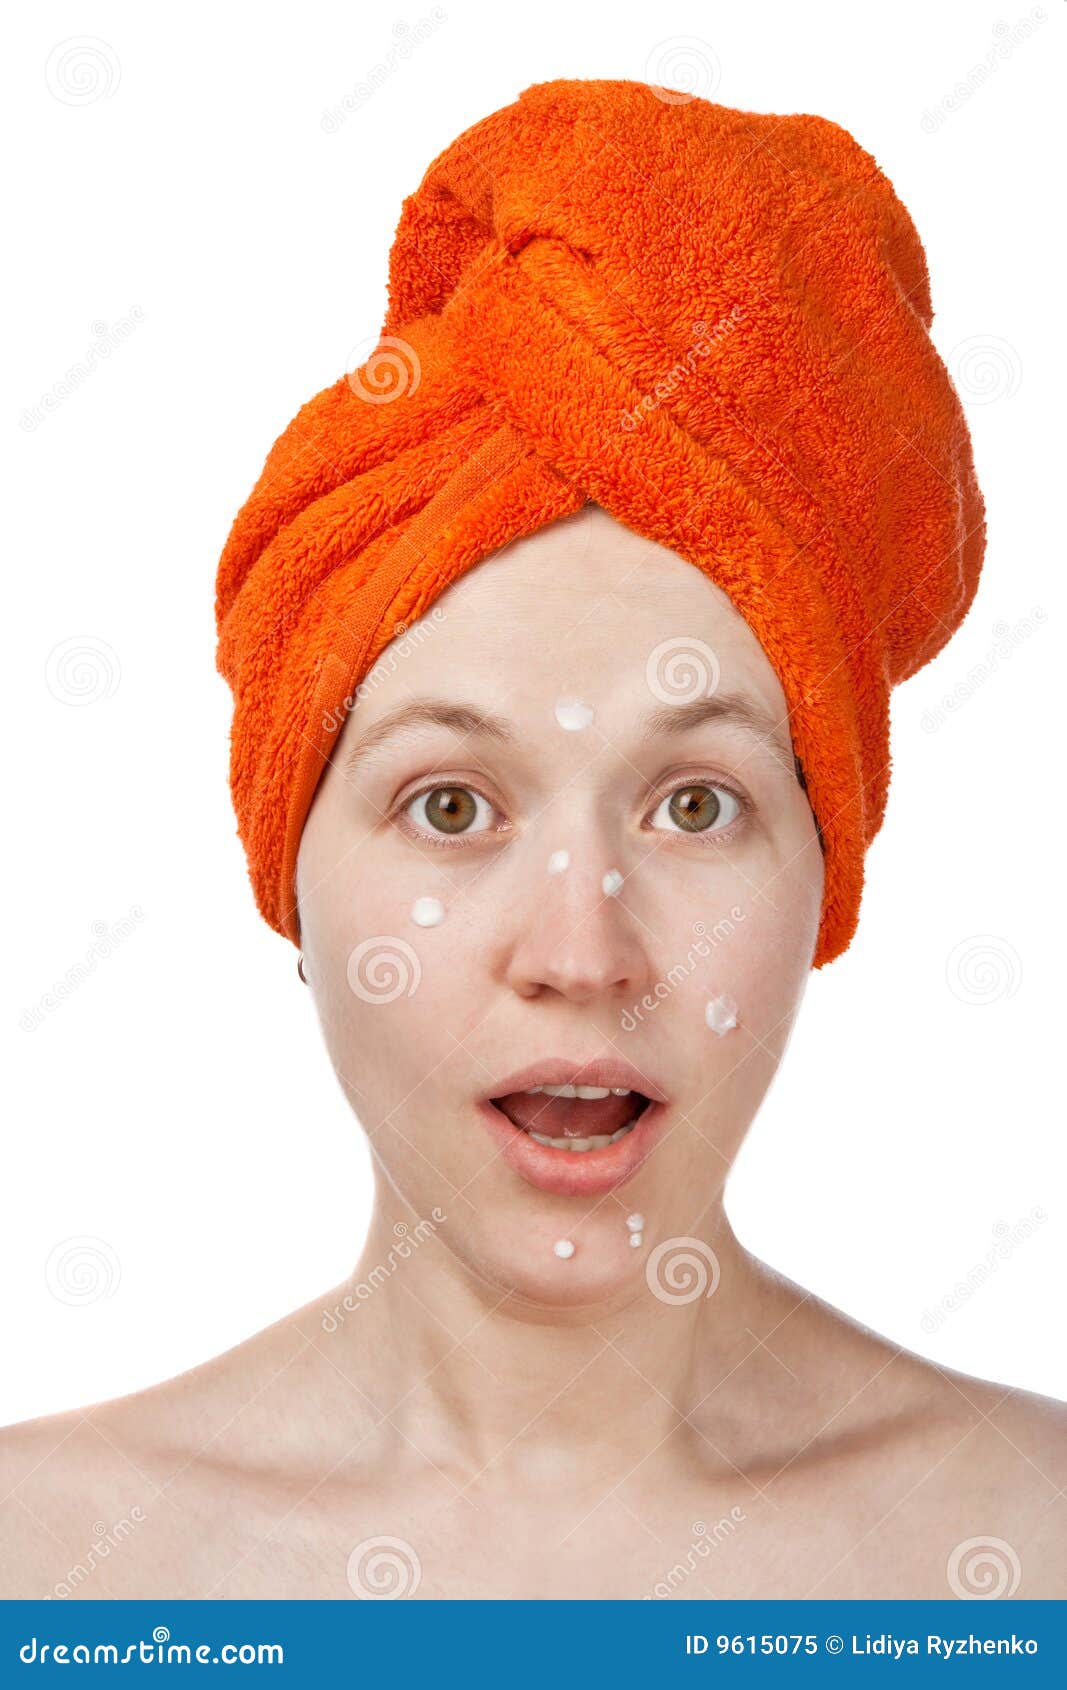 The Girl A Anti Akne Cream On The Face Stock Image Image Of Akne Pimple